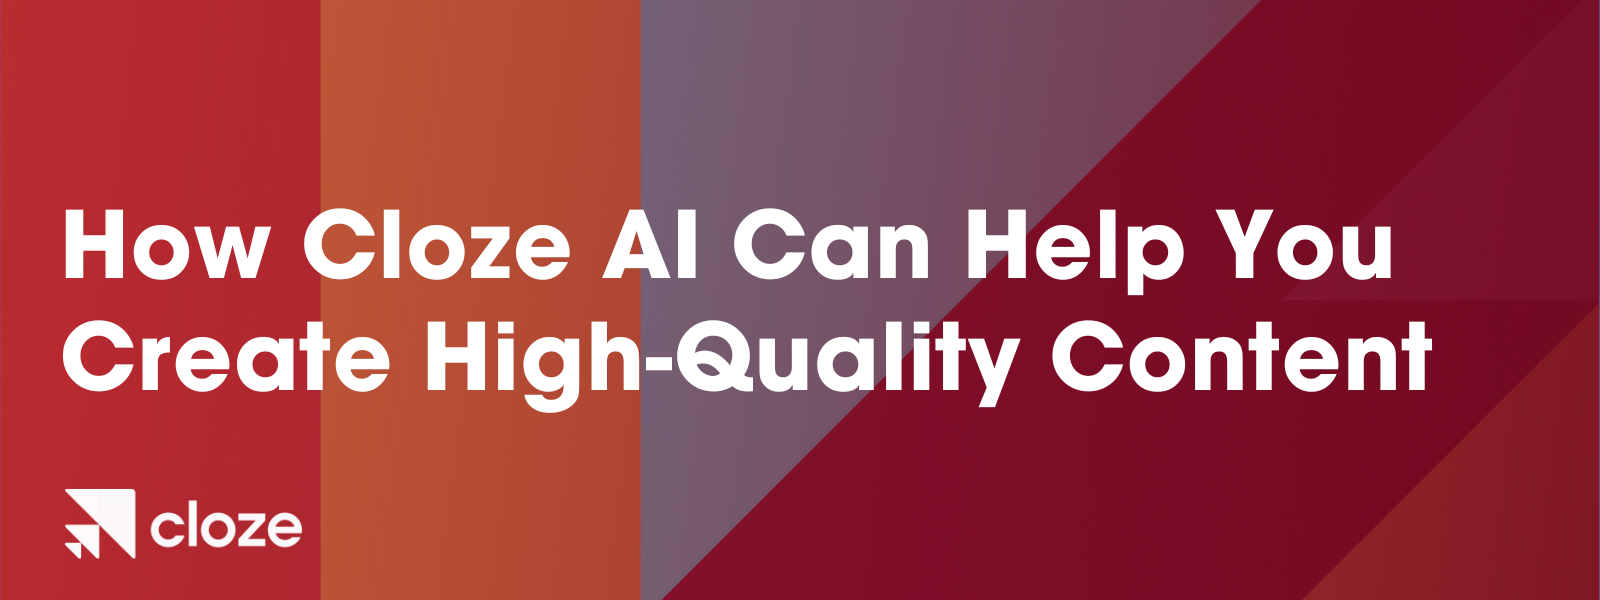 How Cloze AI Can Help You Create High-Quality Content